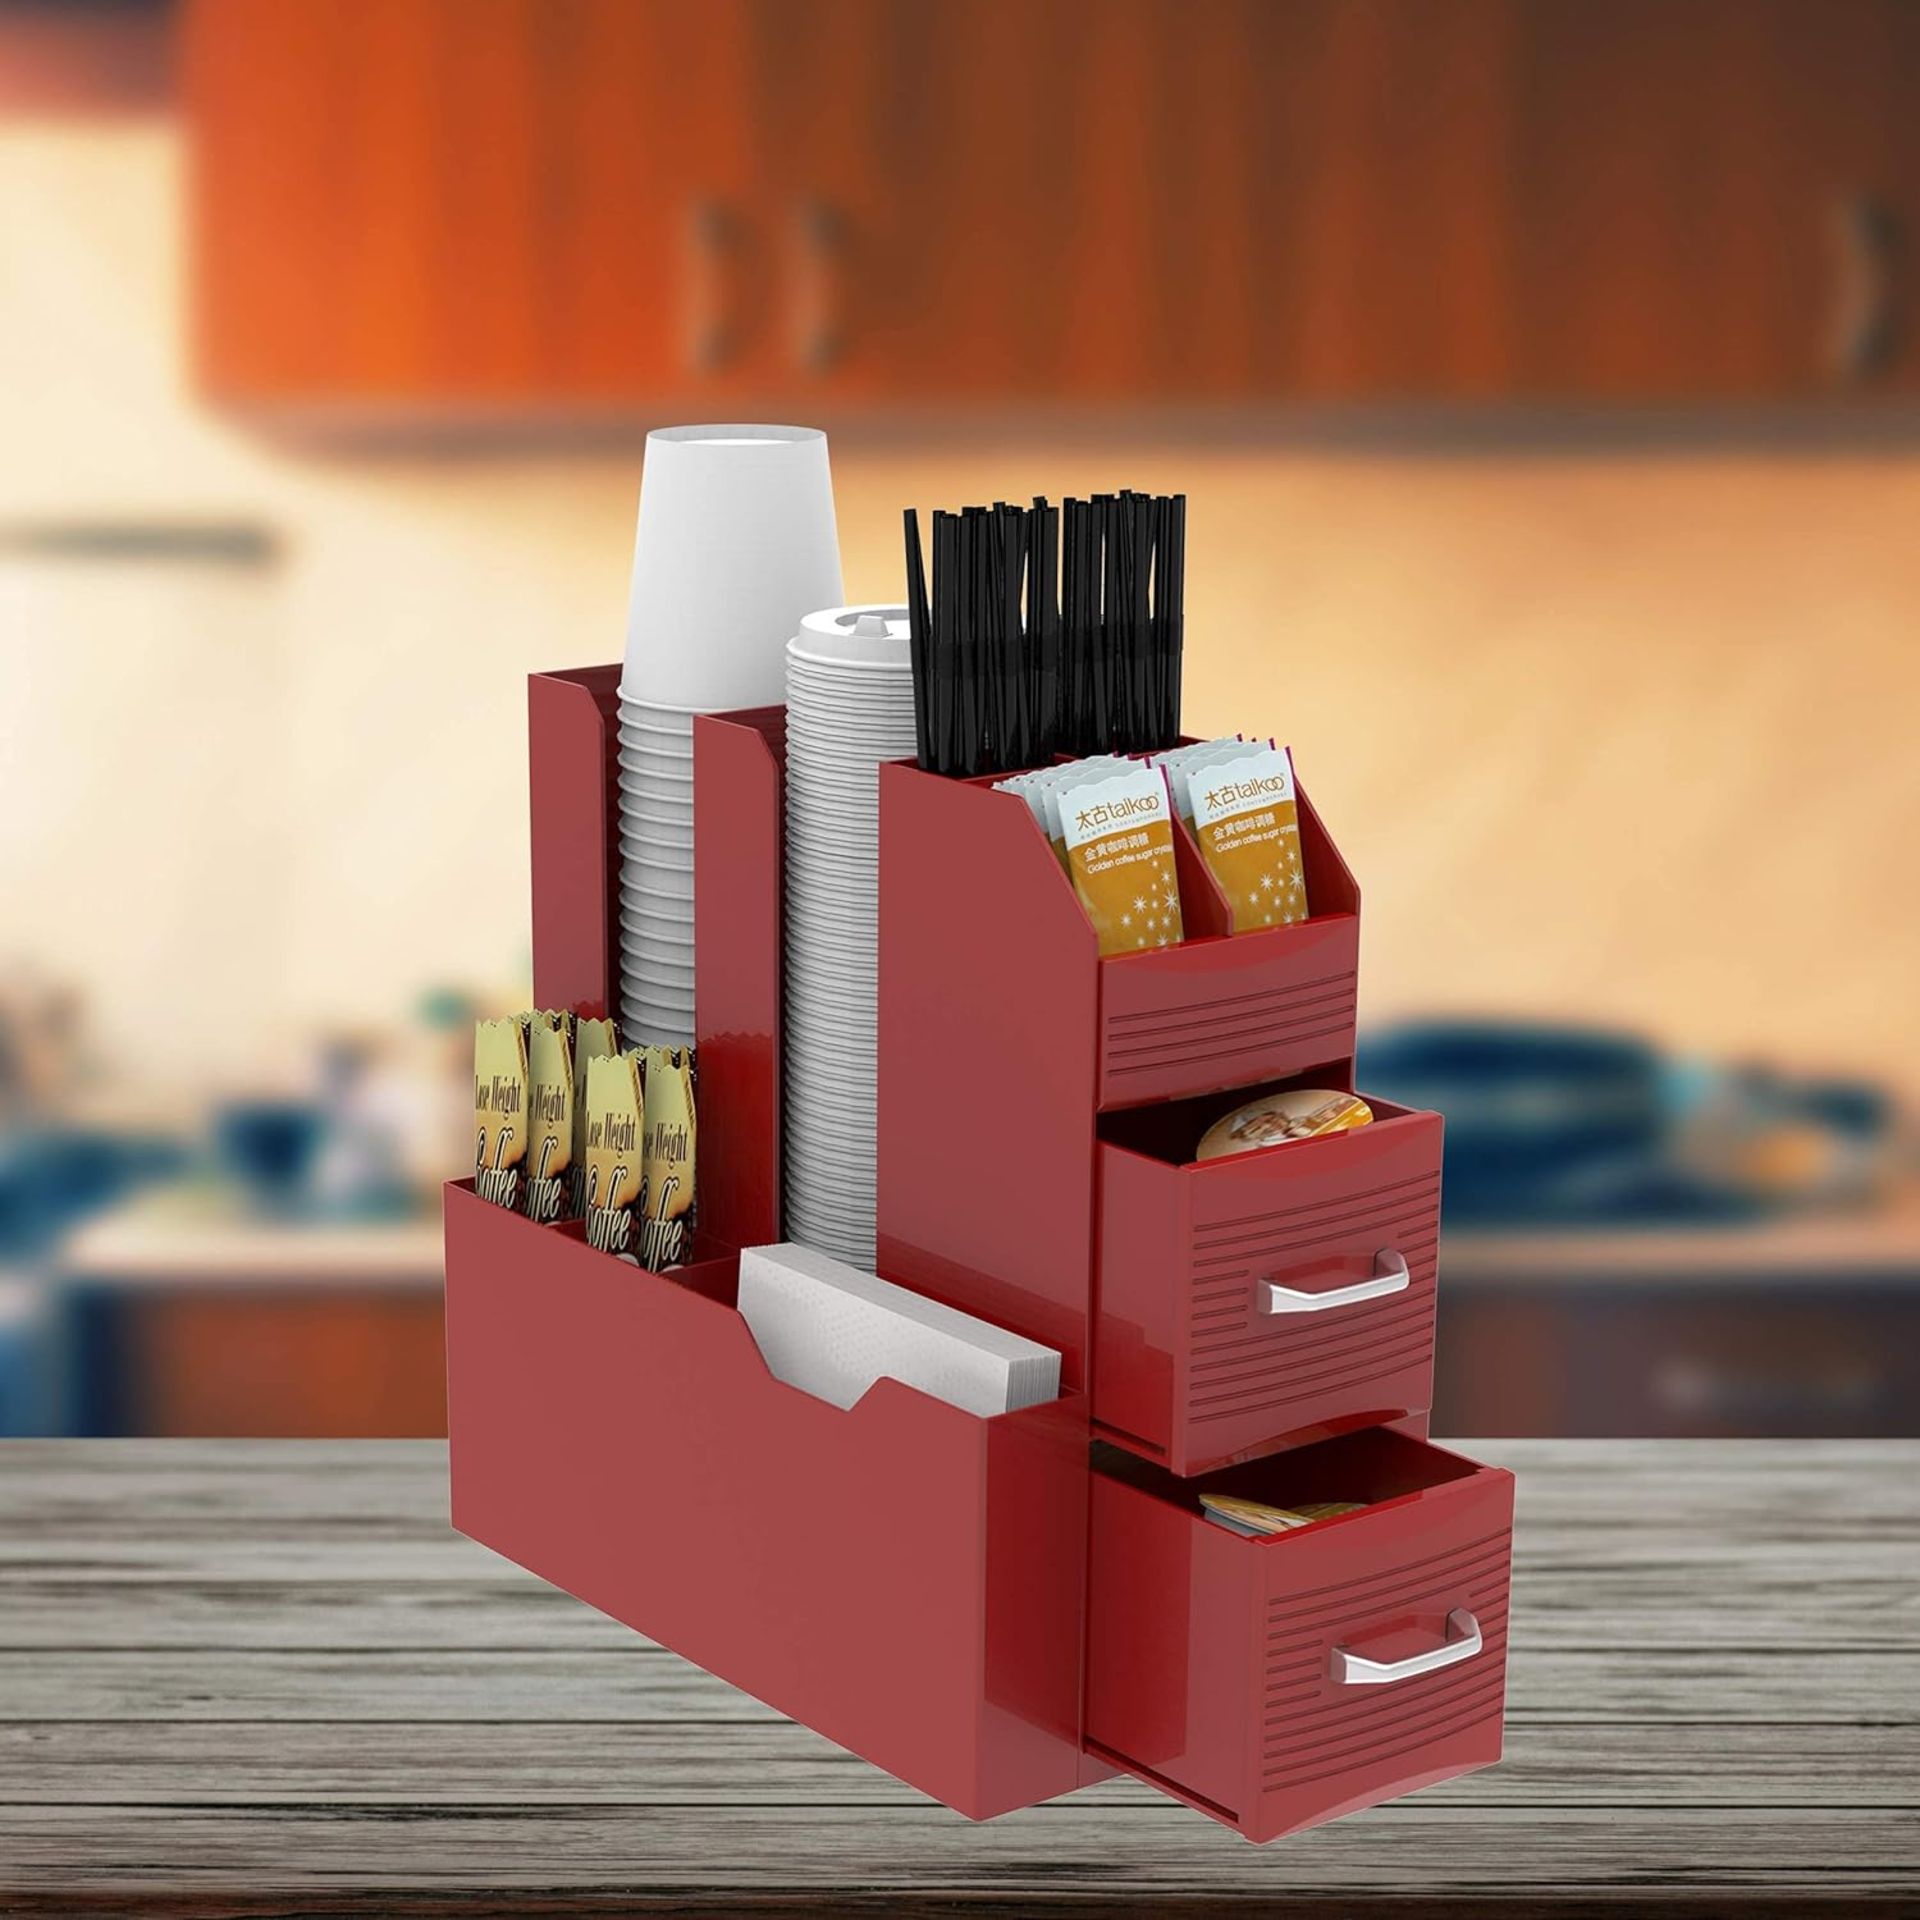 FULL PALLET OF RED HALTER COFFEE ACCESSORIES CADDY ORGANIZER - 9 COMPARTMENTS AND 2 DRAWERS - Image 6 of 6